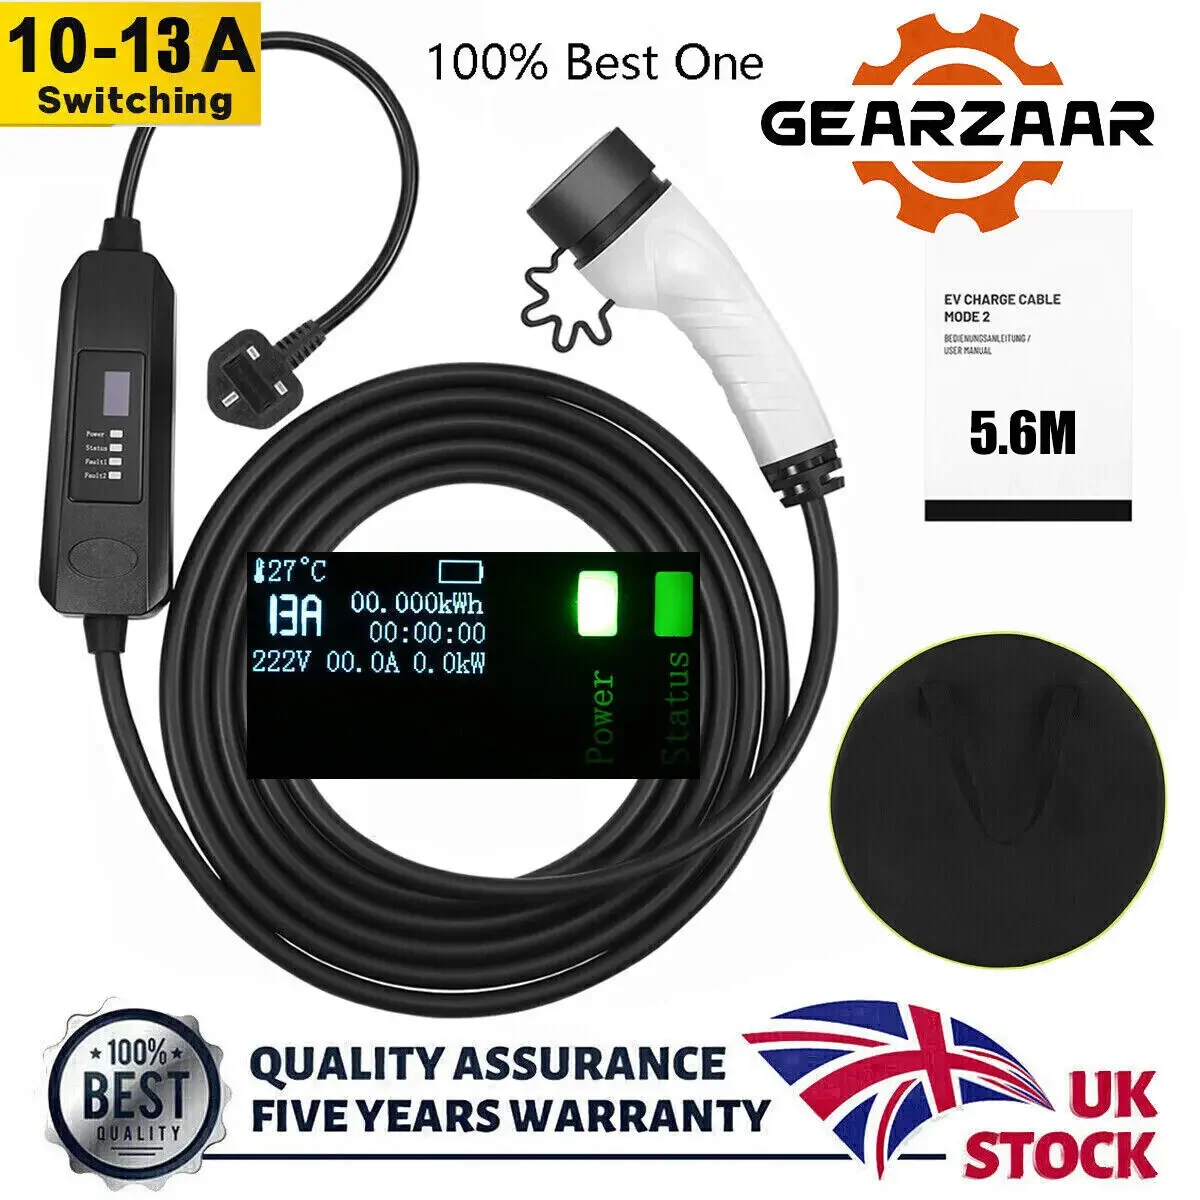 GEARZAAR Mobile EV Charging Cable 5.6M Type 2 UK Plug 3 Pin13A Wallbox For  Electric Vehicle Car Charger Portable With LCD Screen - AliExpress